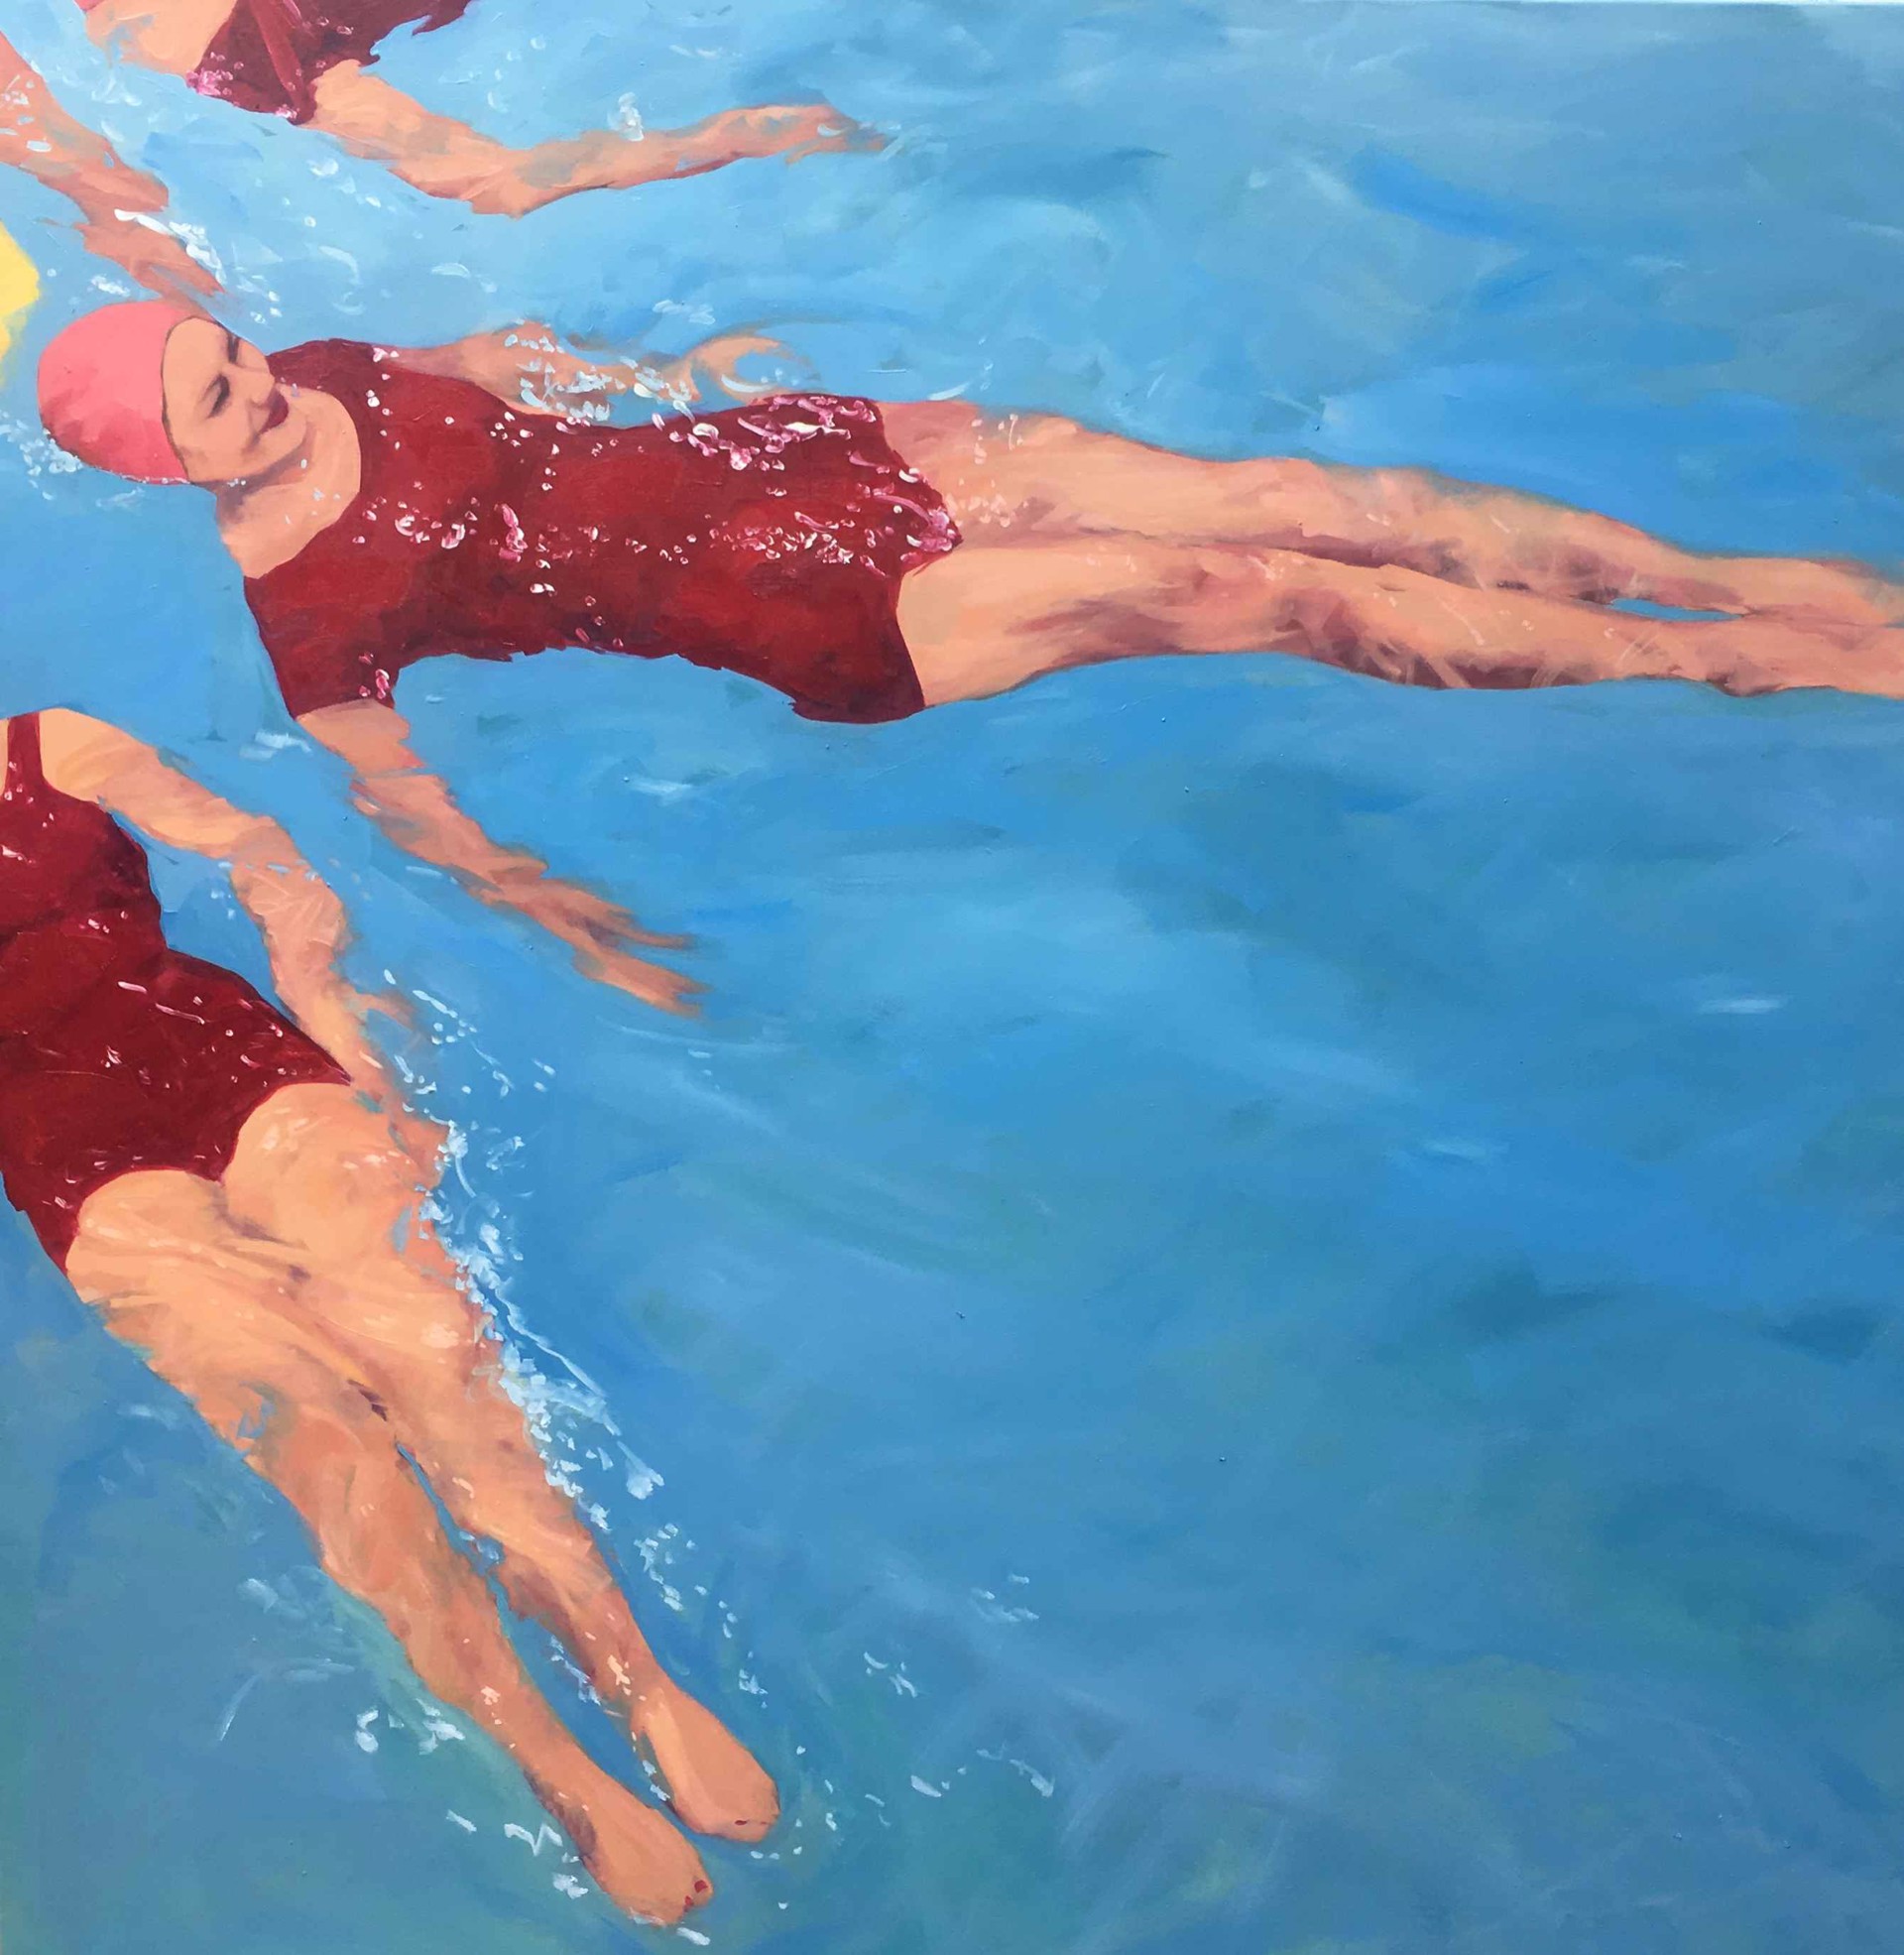 Synchronicity by Tracey Sylvester Harris